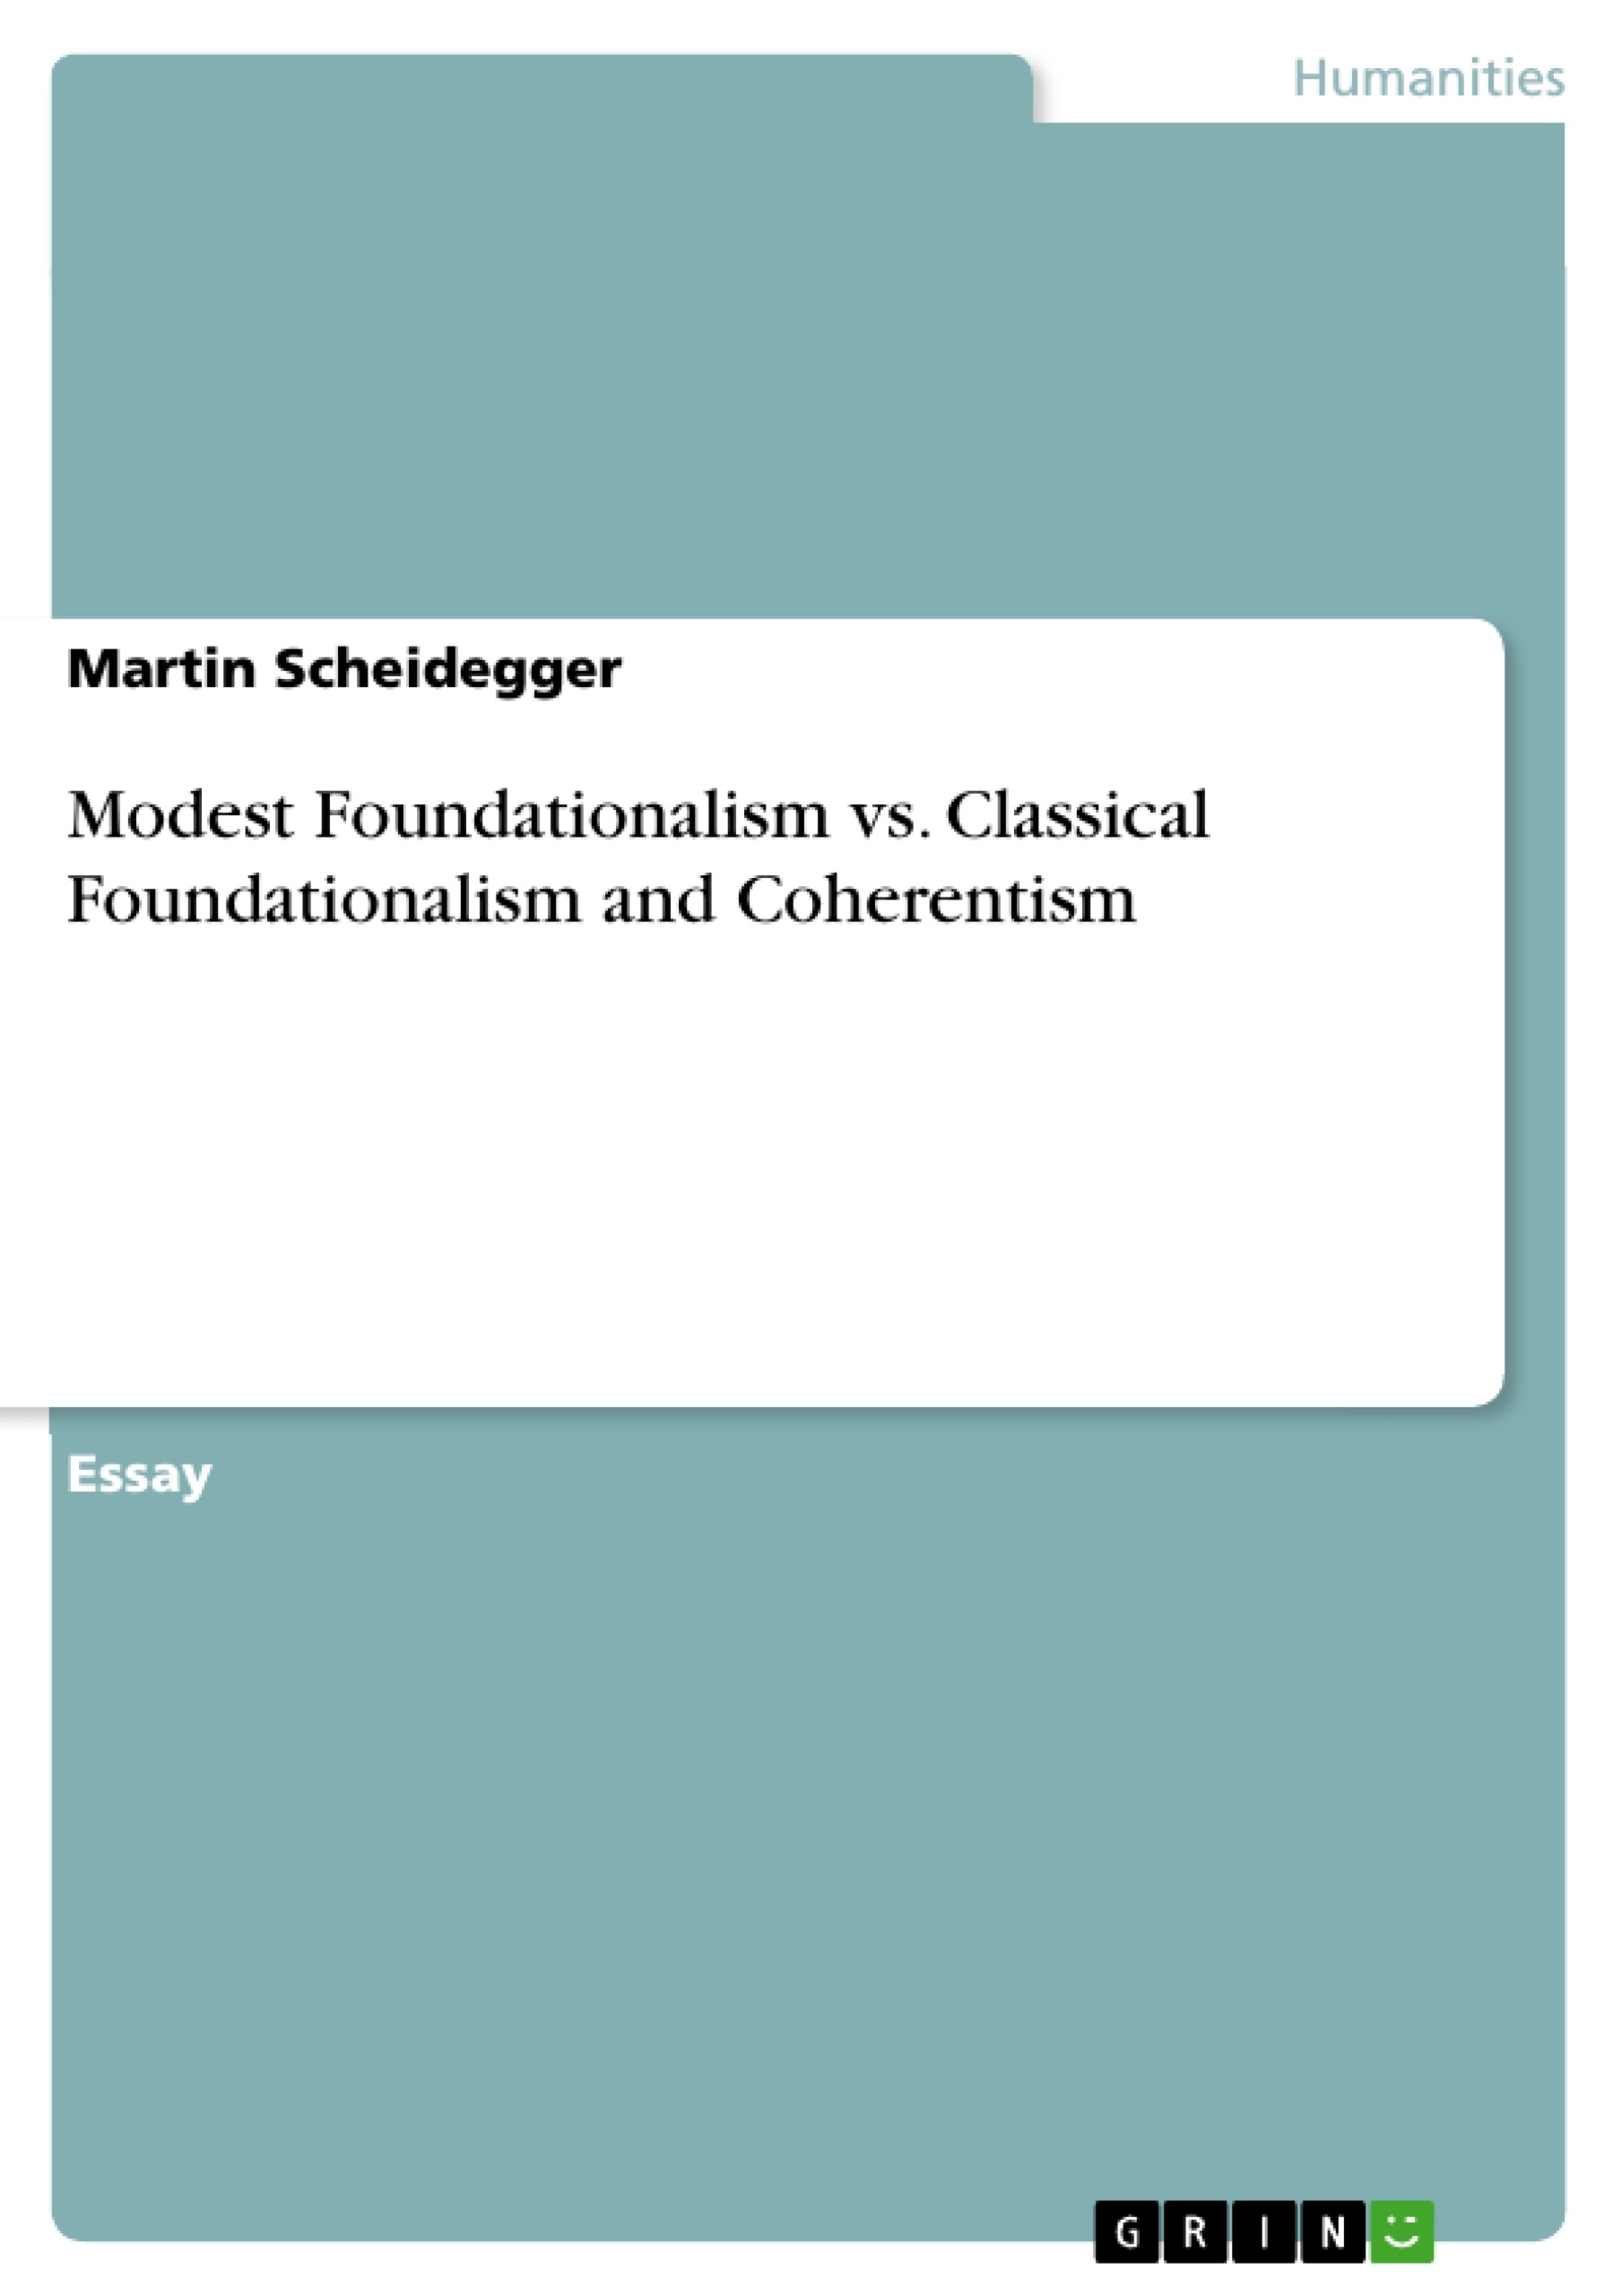 Title: Modest Foundationalism vs. Classical Foundationalism and Coherentism